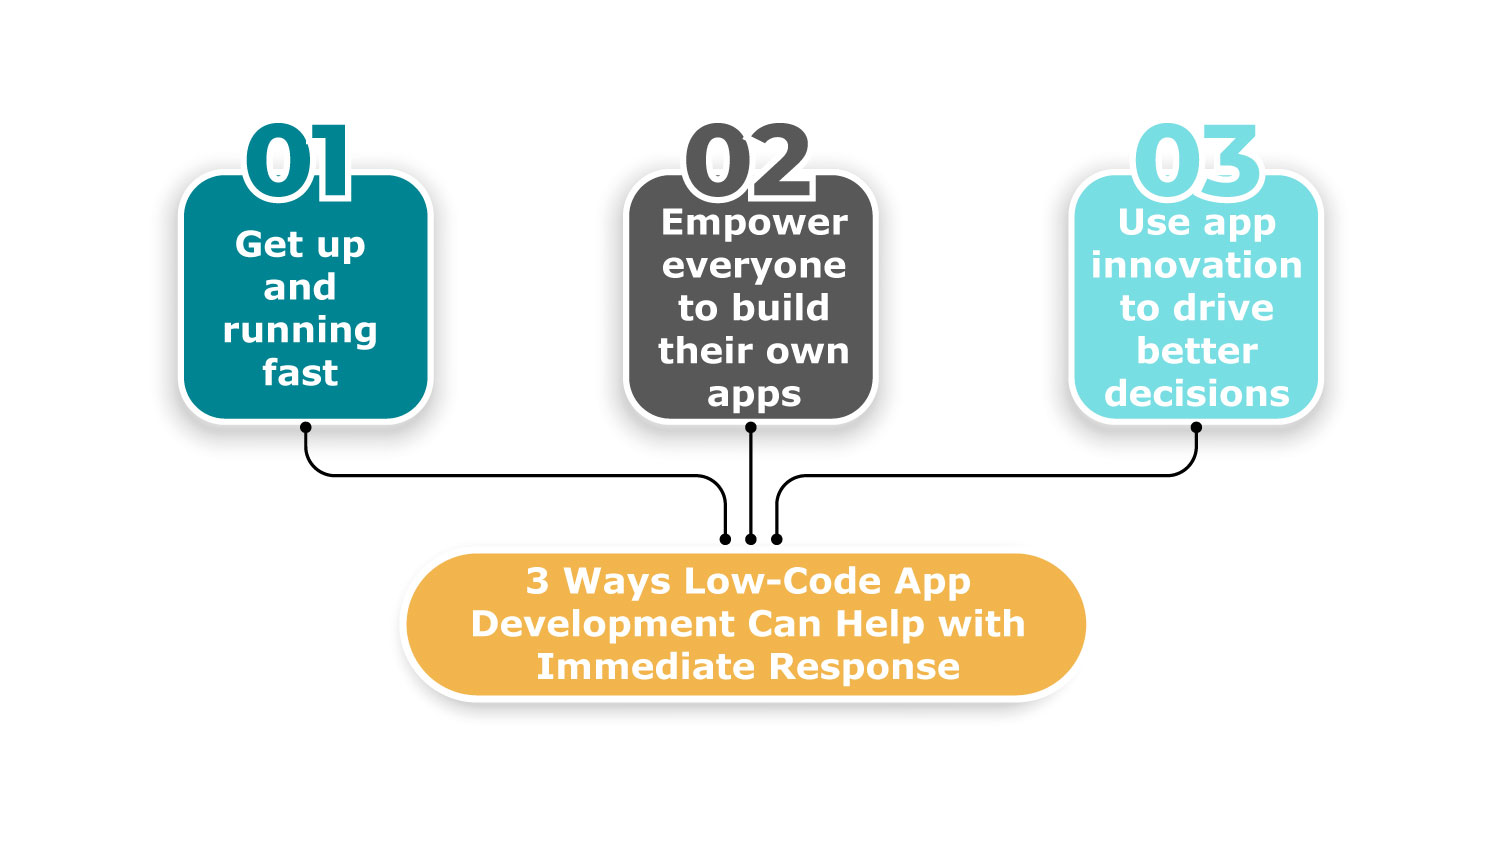 3 ways low-code app development can help with immediate response